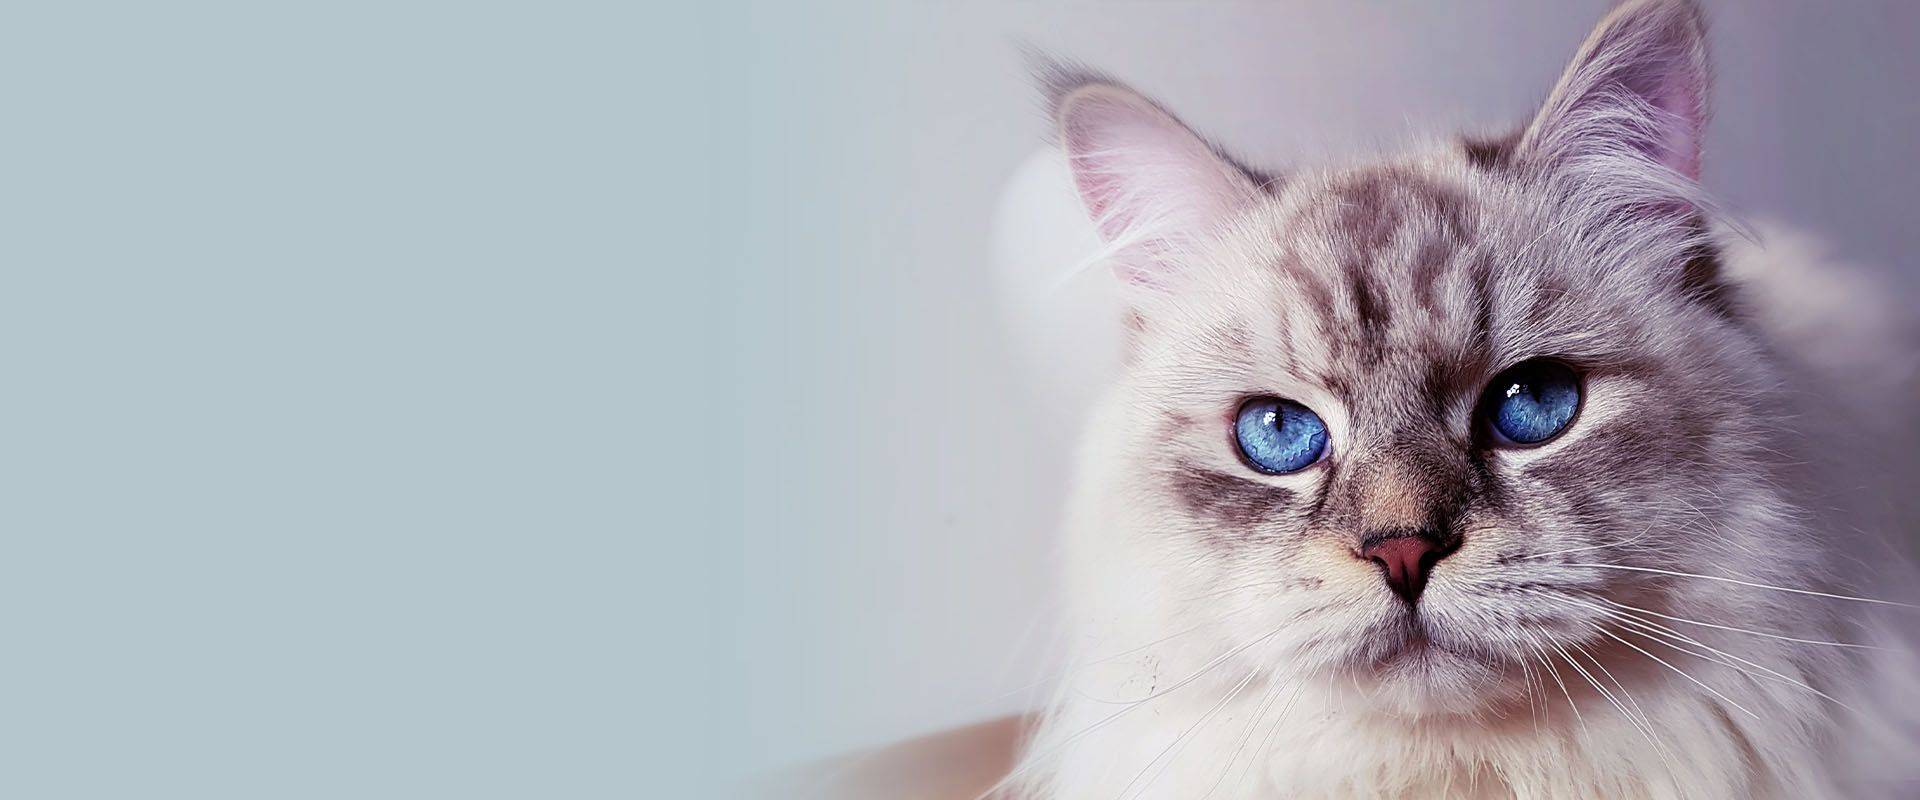 A close-up image of a cat with striking blue eyes